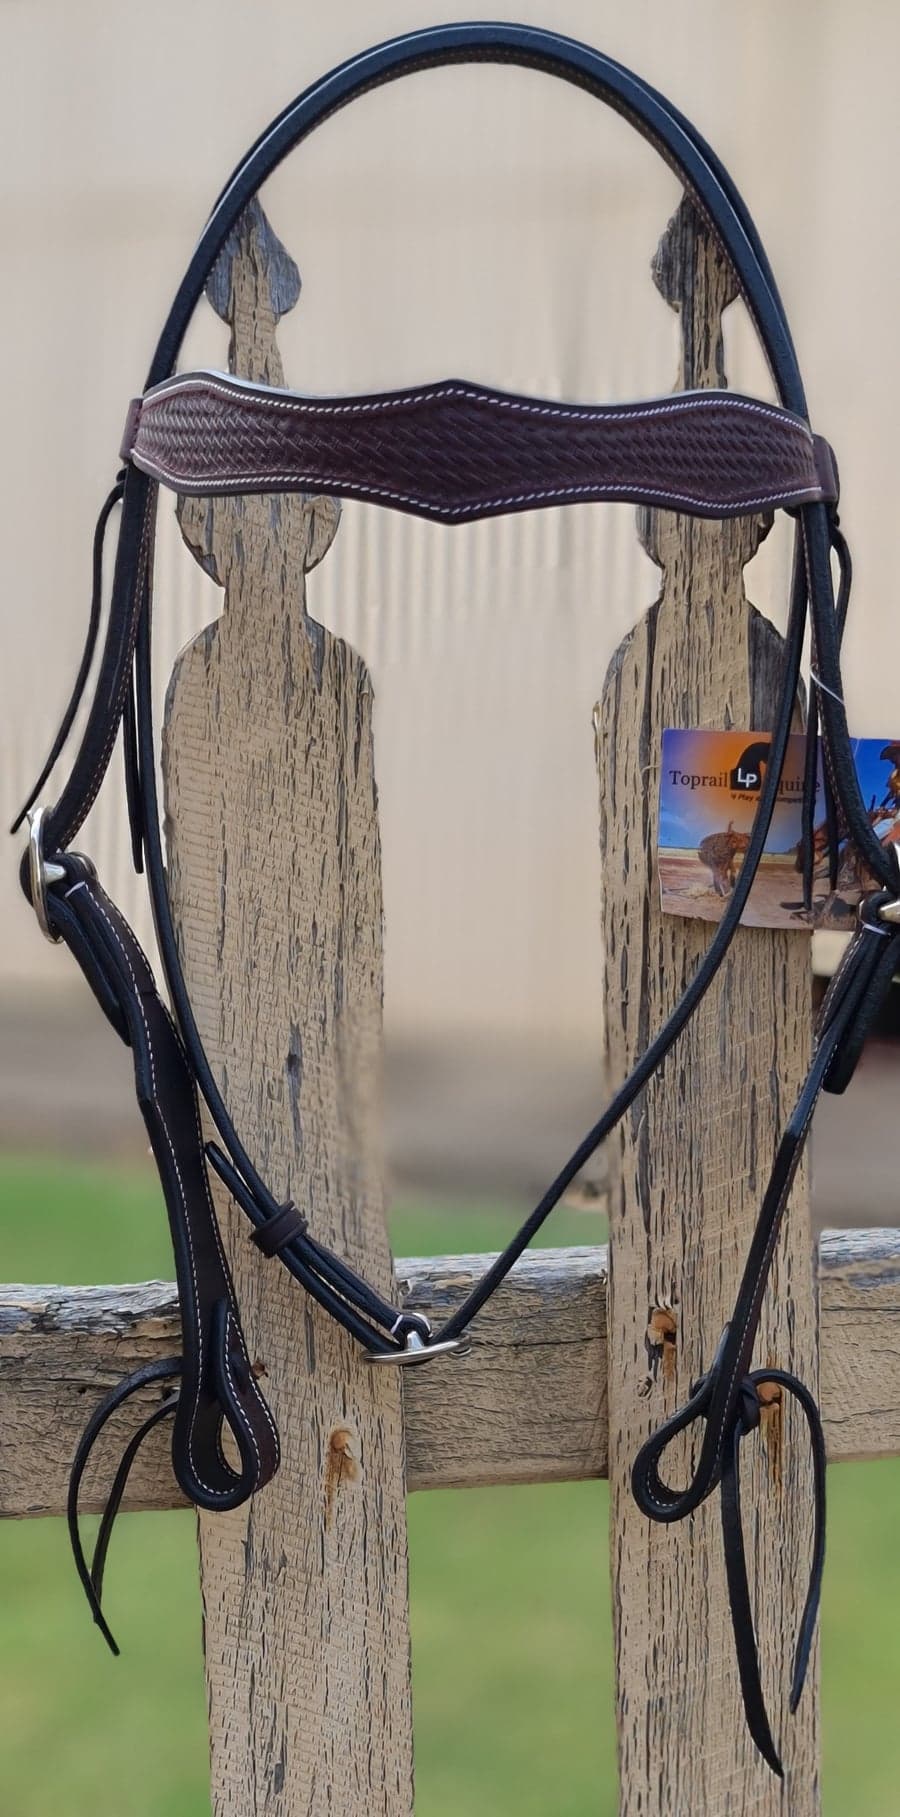 Toprail Equine Diamond Browband Stamped Leather Bridle